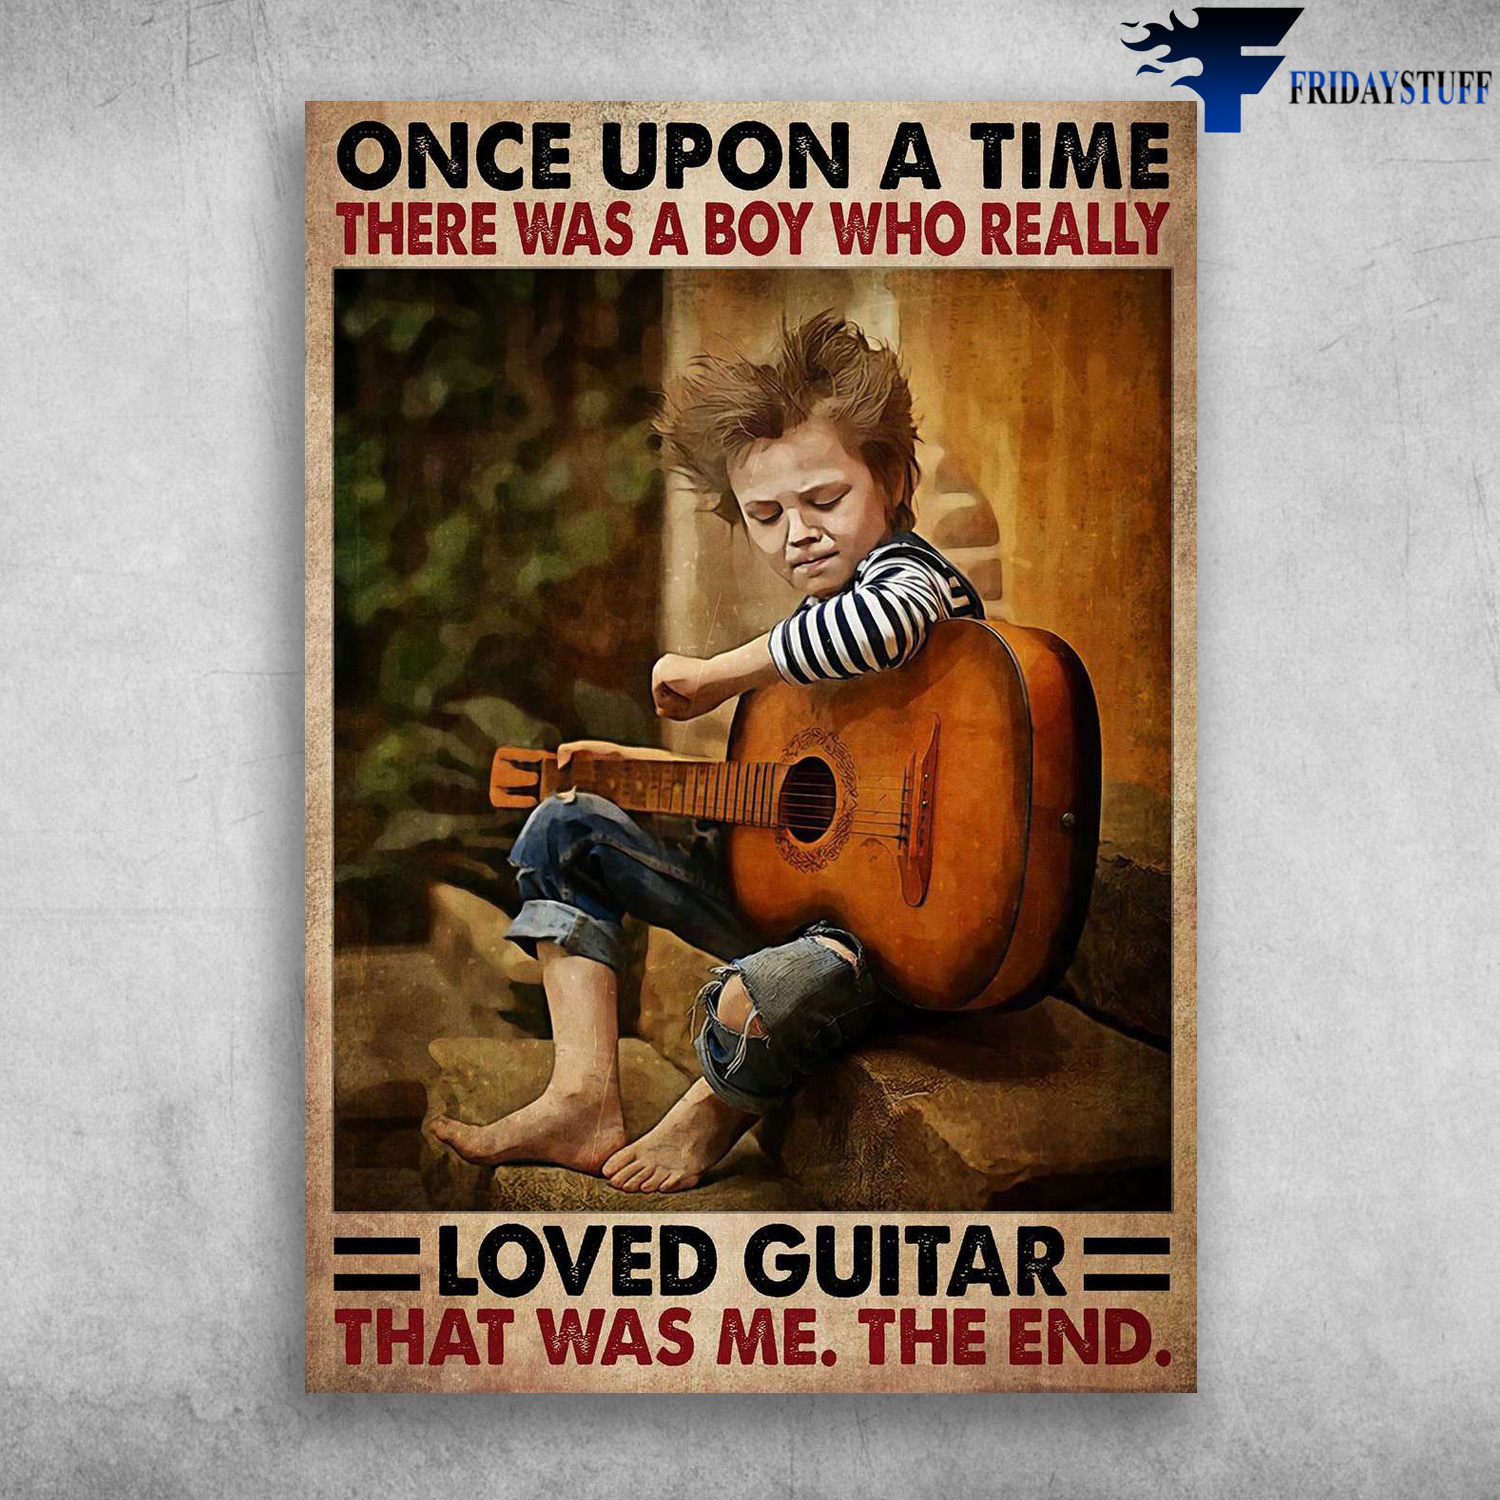 Boy Plays Guitar - Once Upon A Time, There Was A Boy, Who Really Loved Guitar, That Was Me, The End